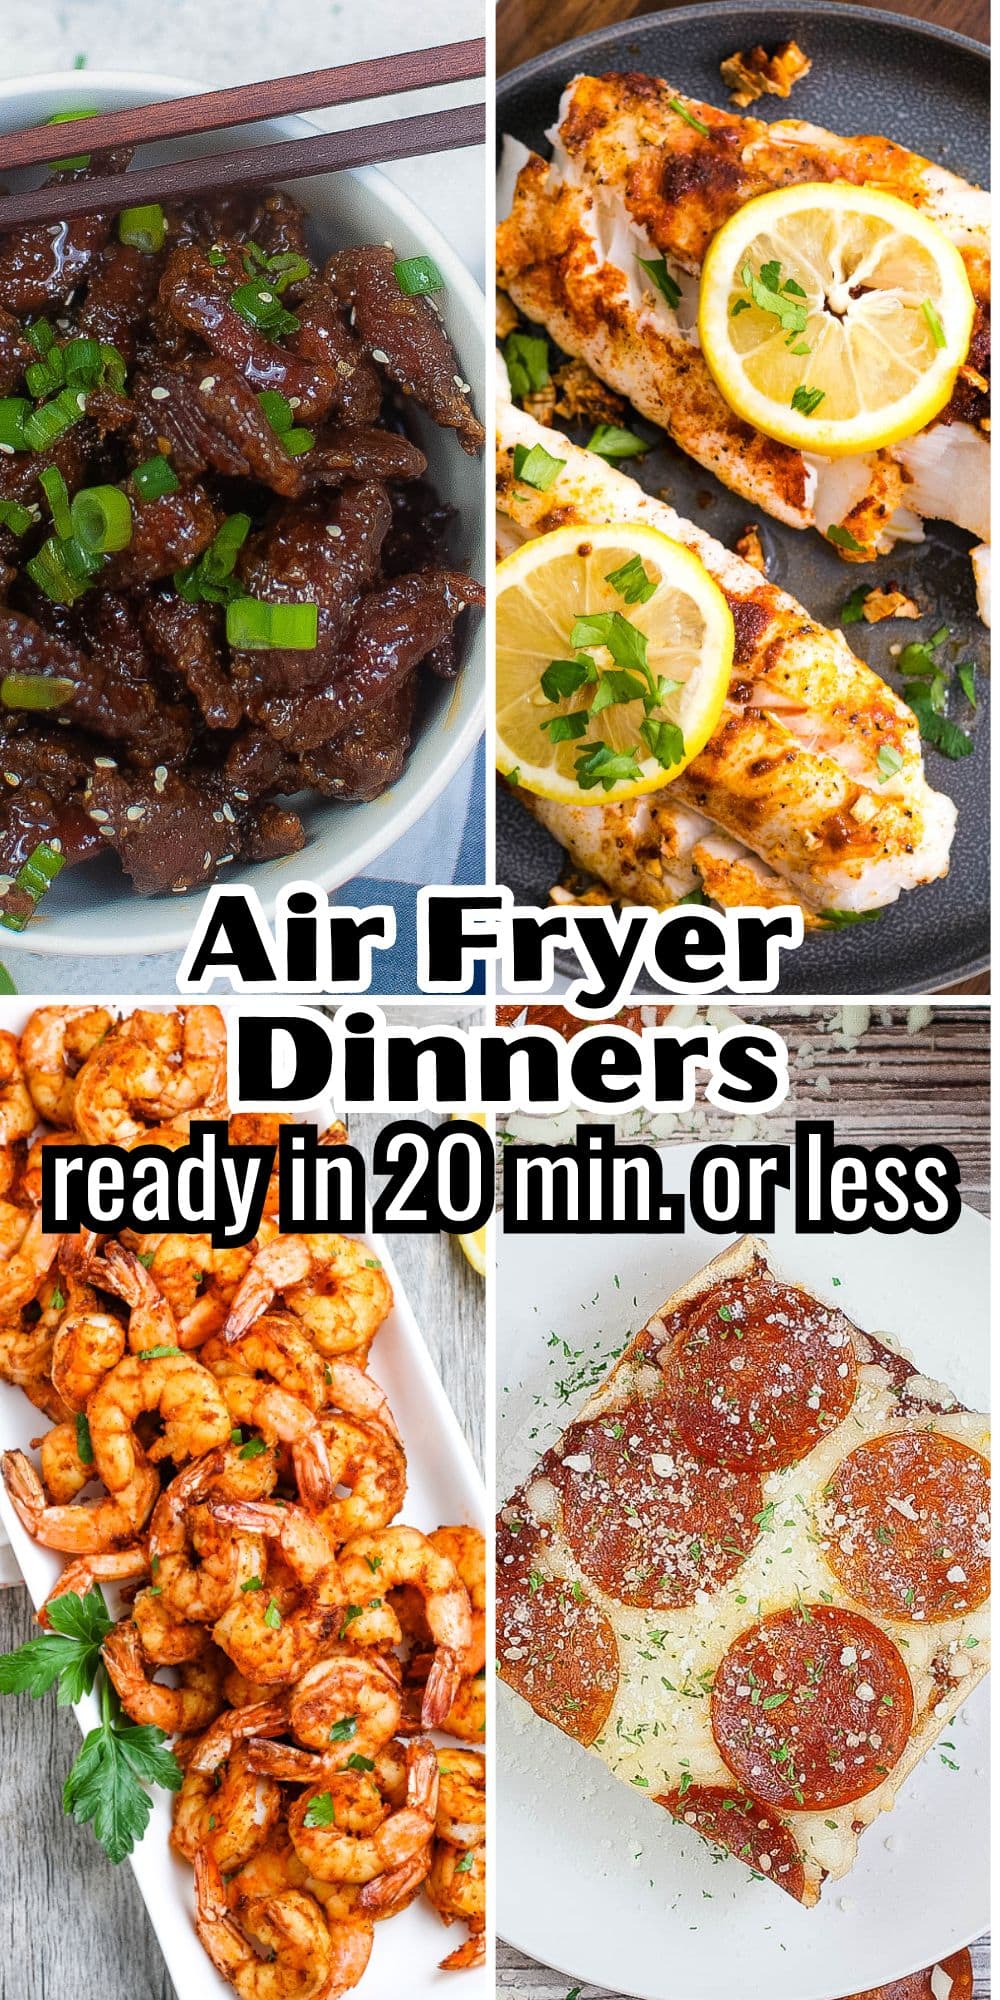 Air fryer dinners ready in 20 minutes or less.